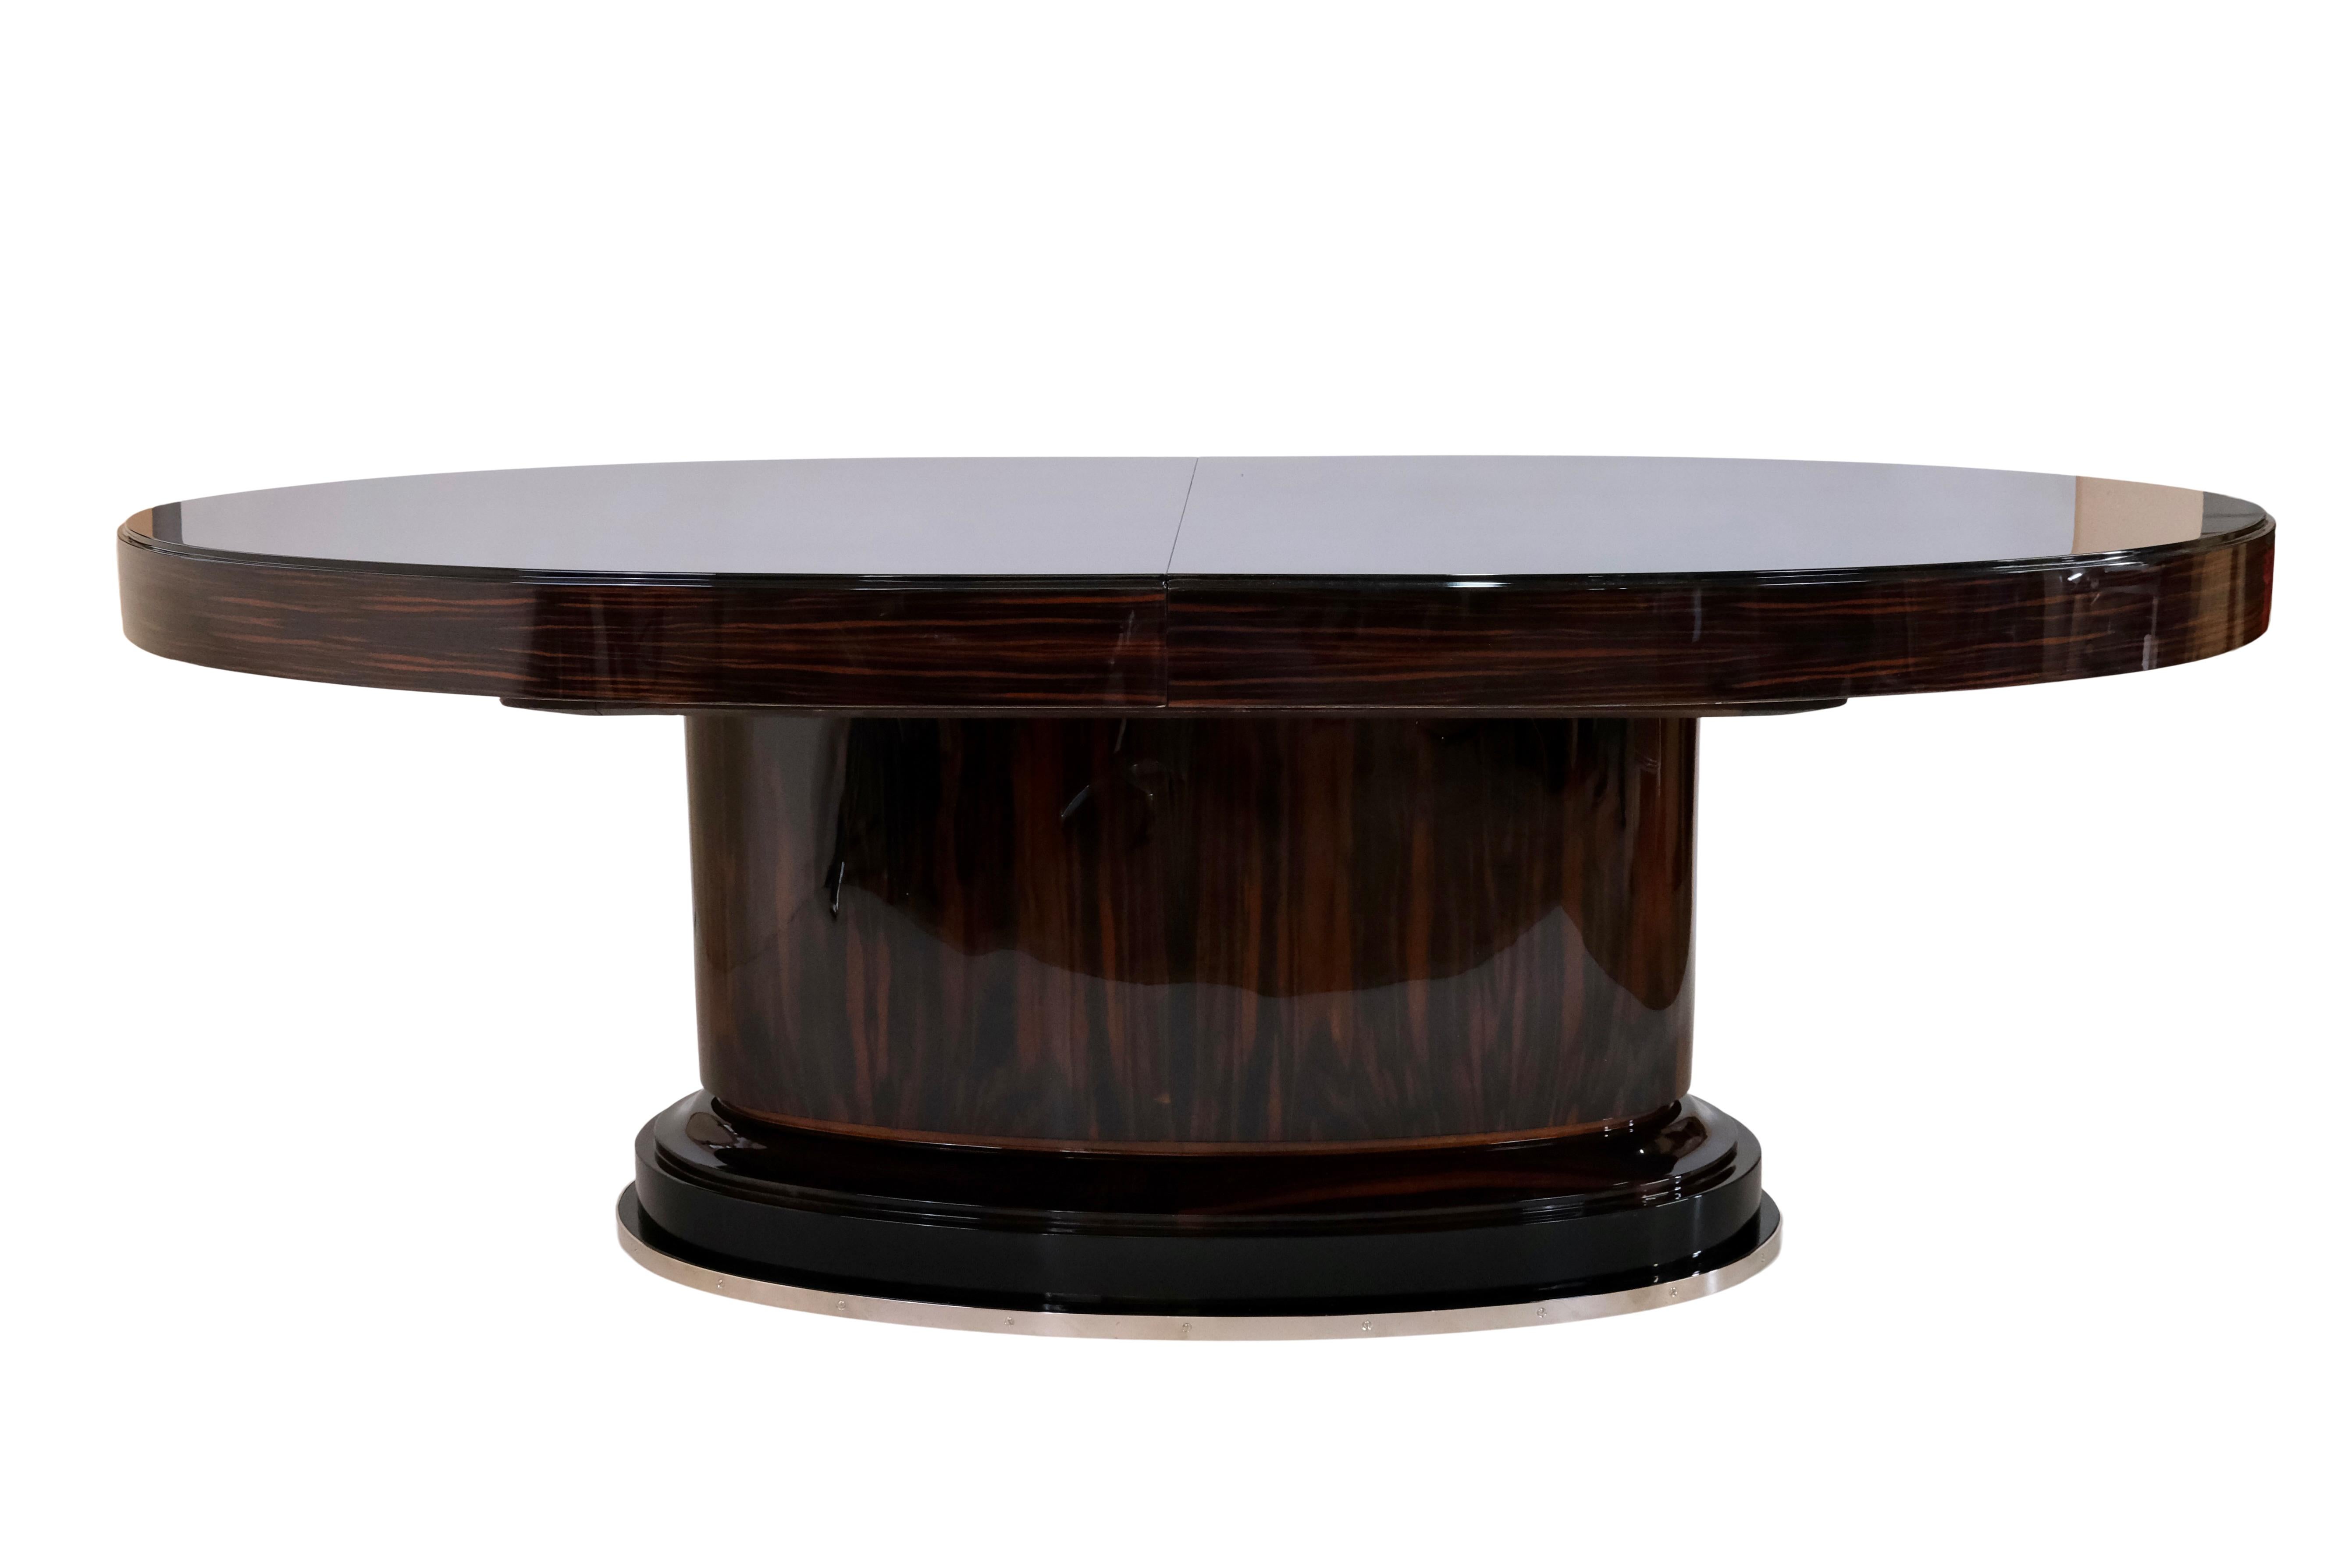 French Oval Art Deco Dining or Conference Table with Black Tabletop and Extension